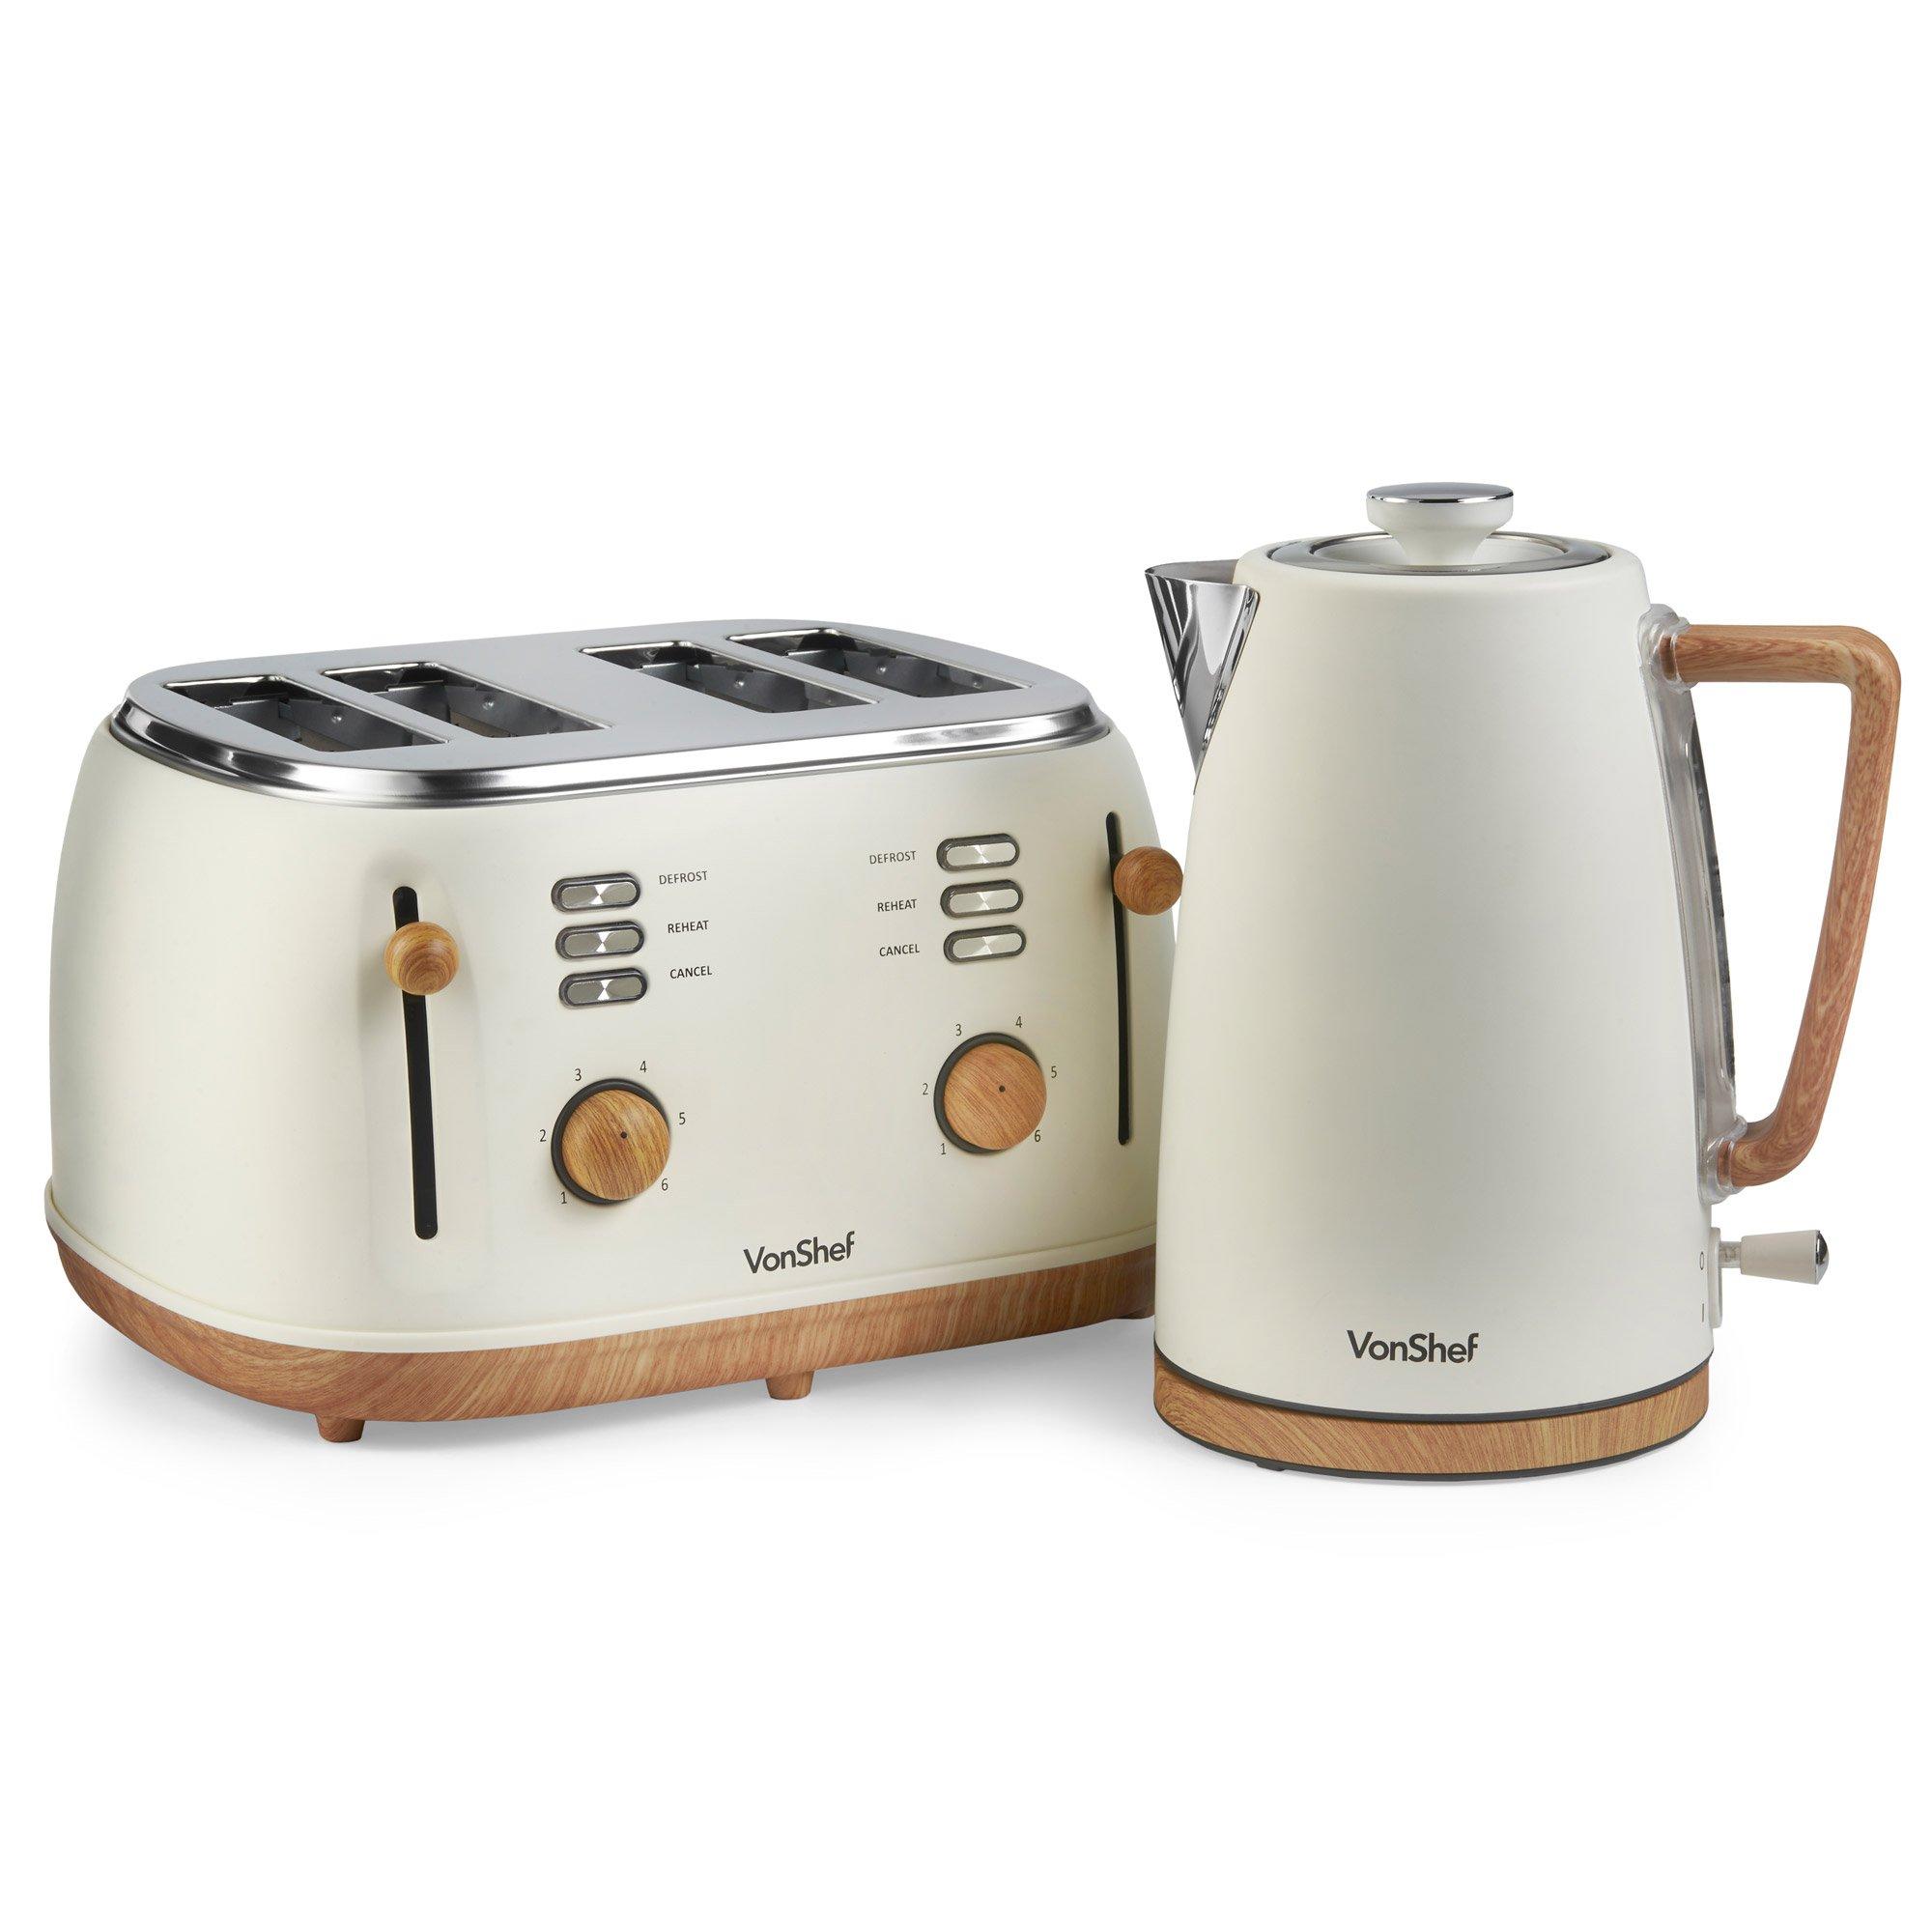 Fika Cream Rapid Boil Kettle And Four Slice Wide Slot Toaster Set